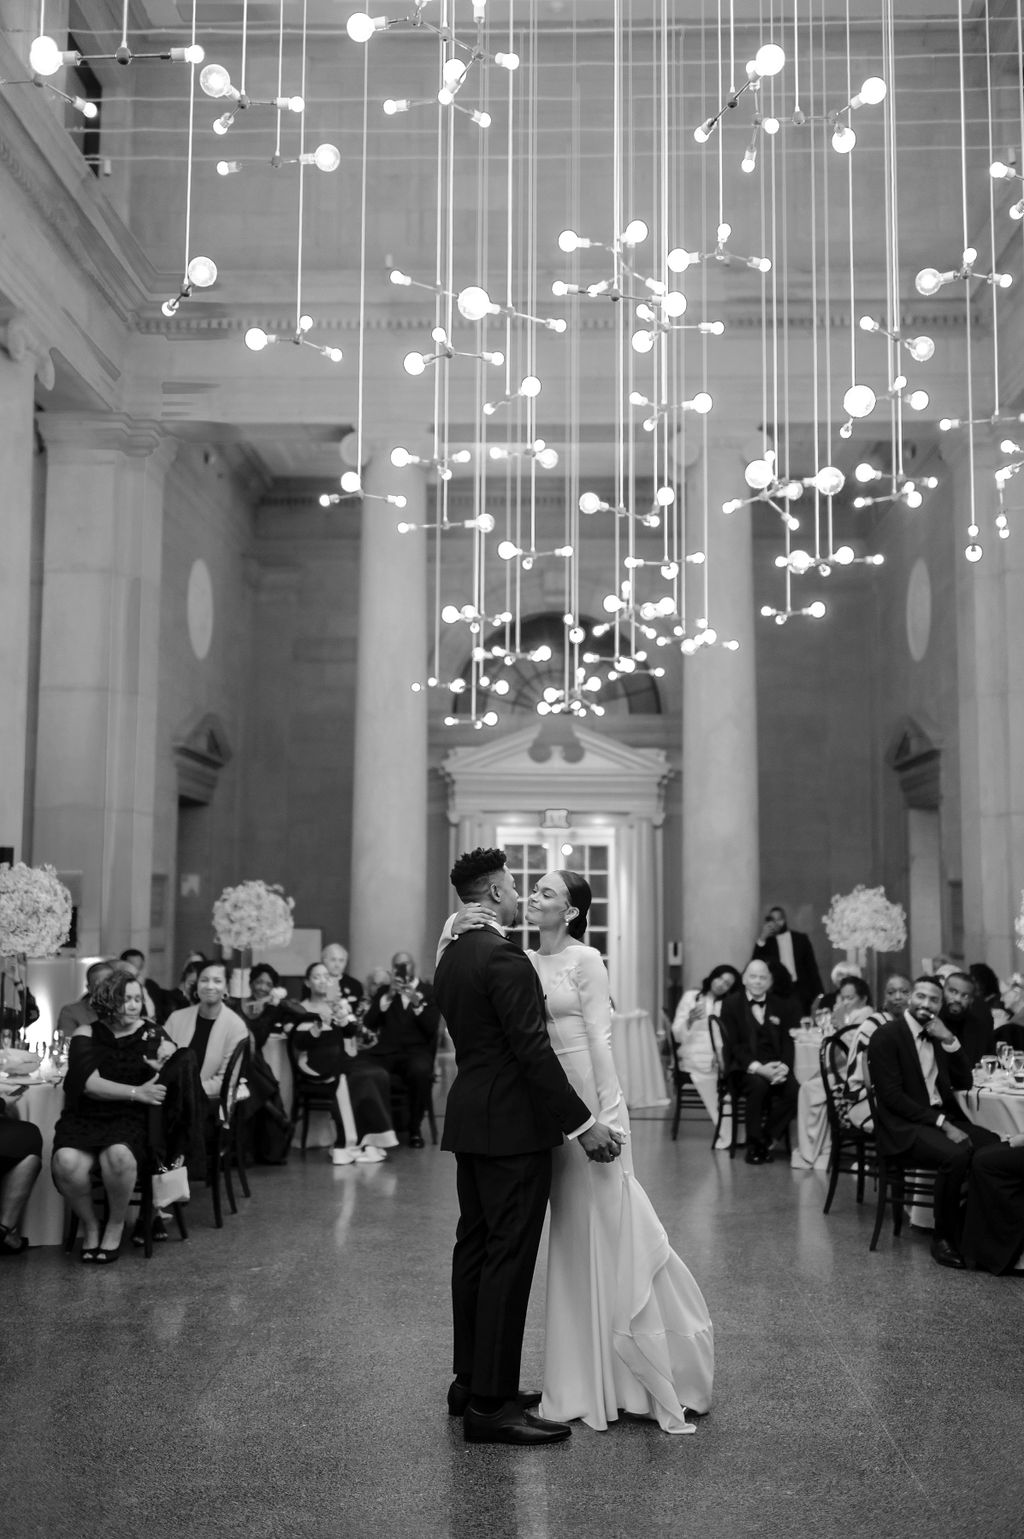 Formal wedding at the Baltimore Museum of Art